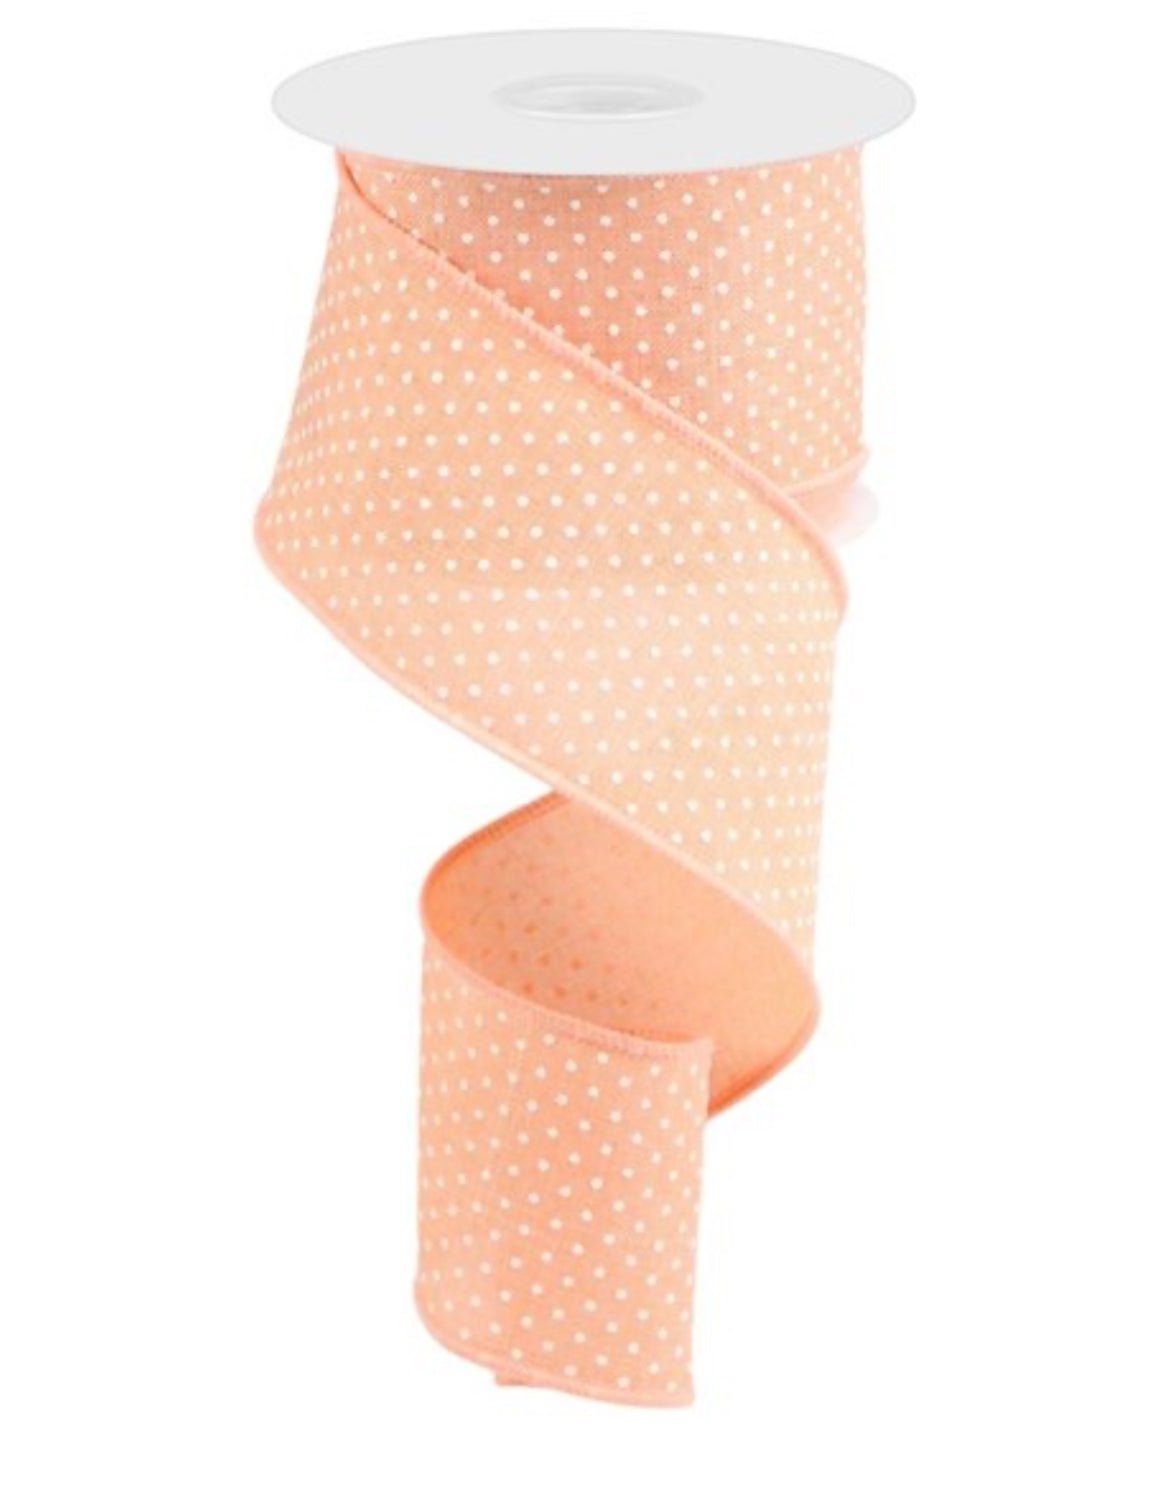 Peach and white Swiss dots on royal 2.5” - Greenery MarketWired ribbonRG01652ET